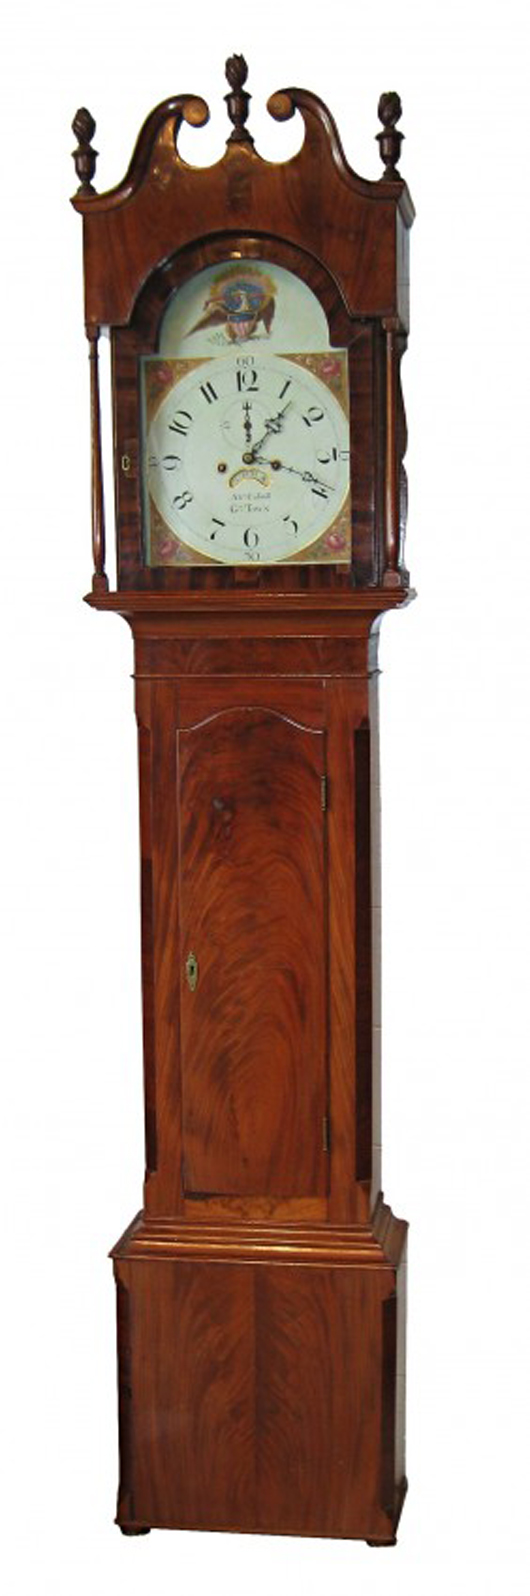 Abraham Cassell signed his early 19th century Philadelphia mahogany tall-case clock that topped $5,875. Image courtesy of Gordon S. Converse & Co.